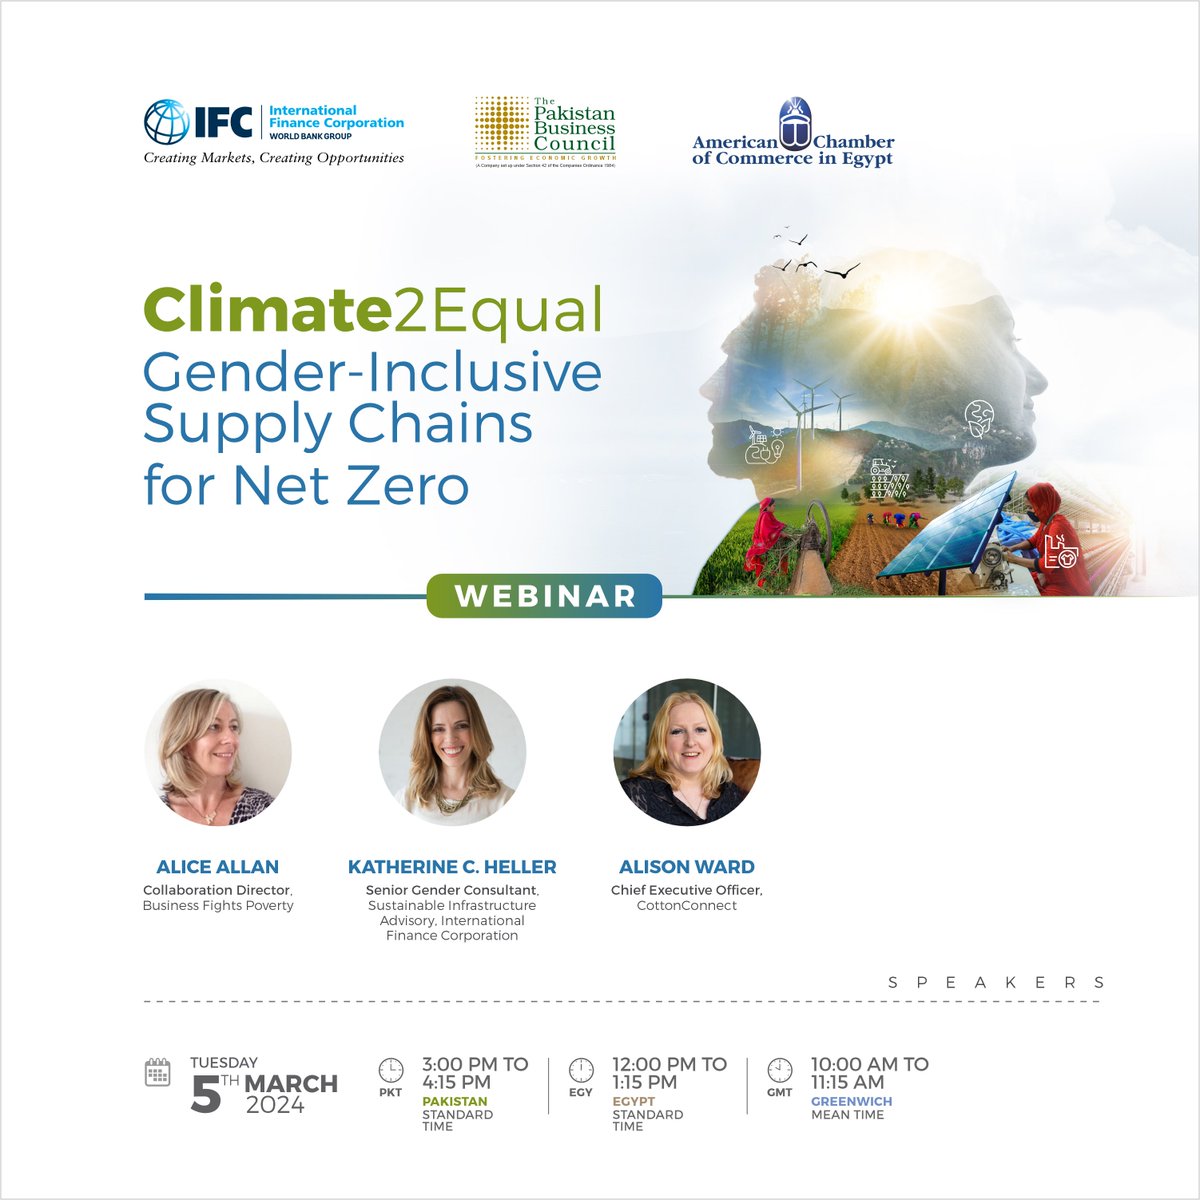 How can businesses ensure #gender-inclusive supply chains in the transition to net-zero? Learn more at a webinar hosted by @IFC_org, @ThePBC_Official, @amcham_egypt on 5 March, featuring experts from @IFC_org, @FightPoverty & @Cotton_Connect.

Register ➡️ wrld.bg/kgN750QGx9j